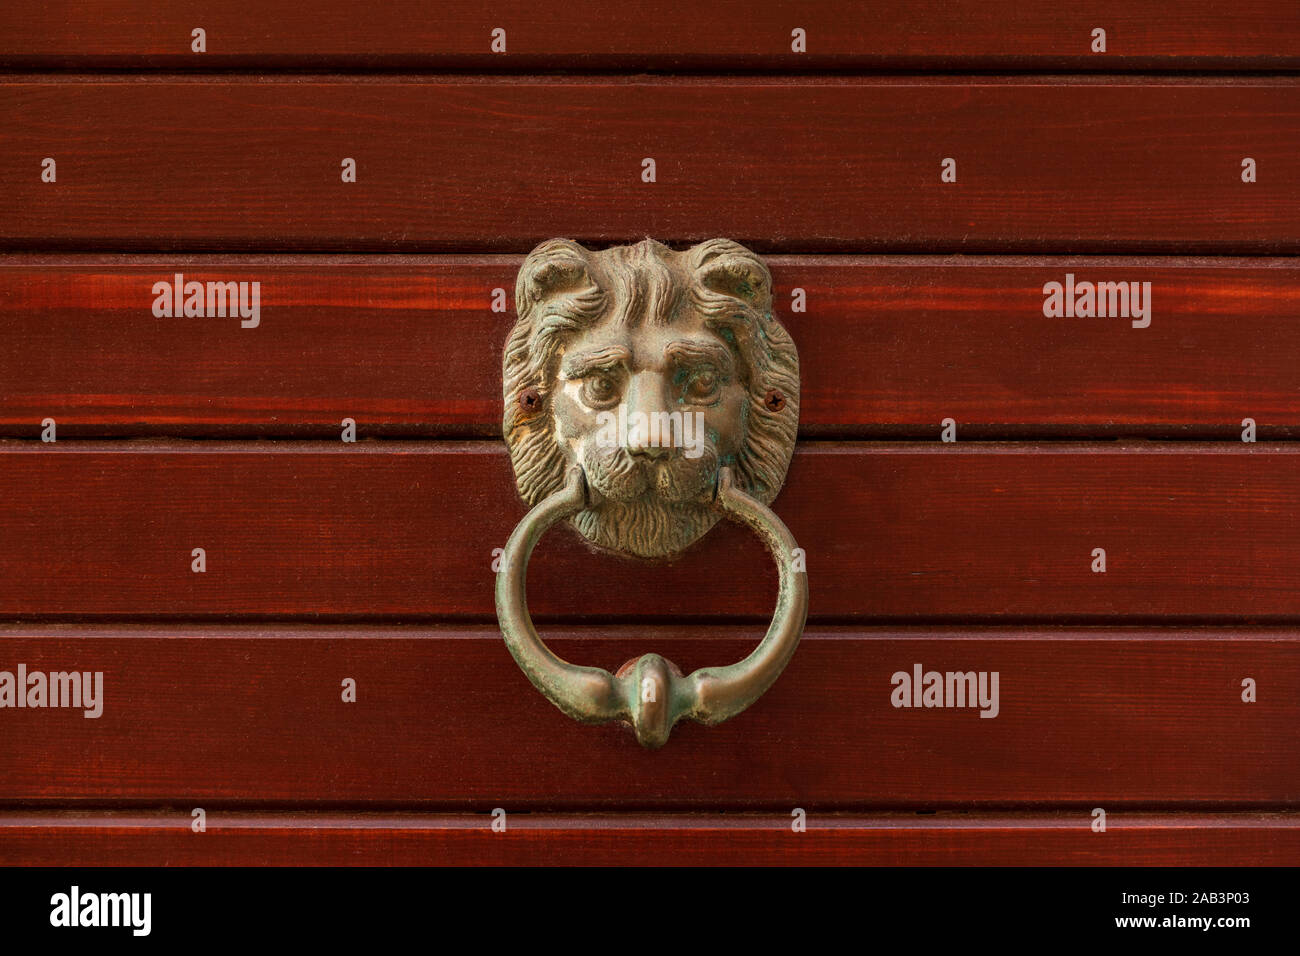 A golden brass door knob with the head of a lion holding a ring in his mouth, round handle. A wooden textured background, red colored horizontal Stock Photo